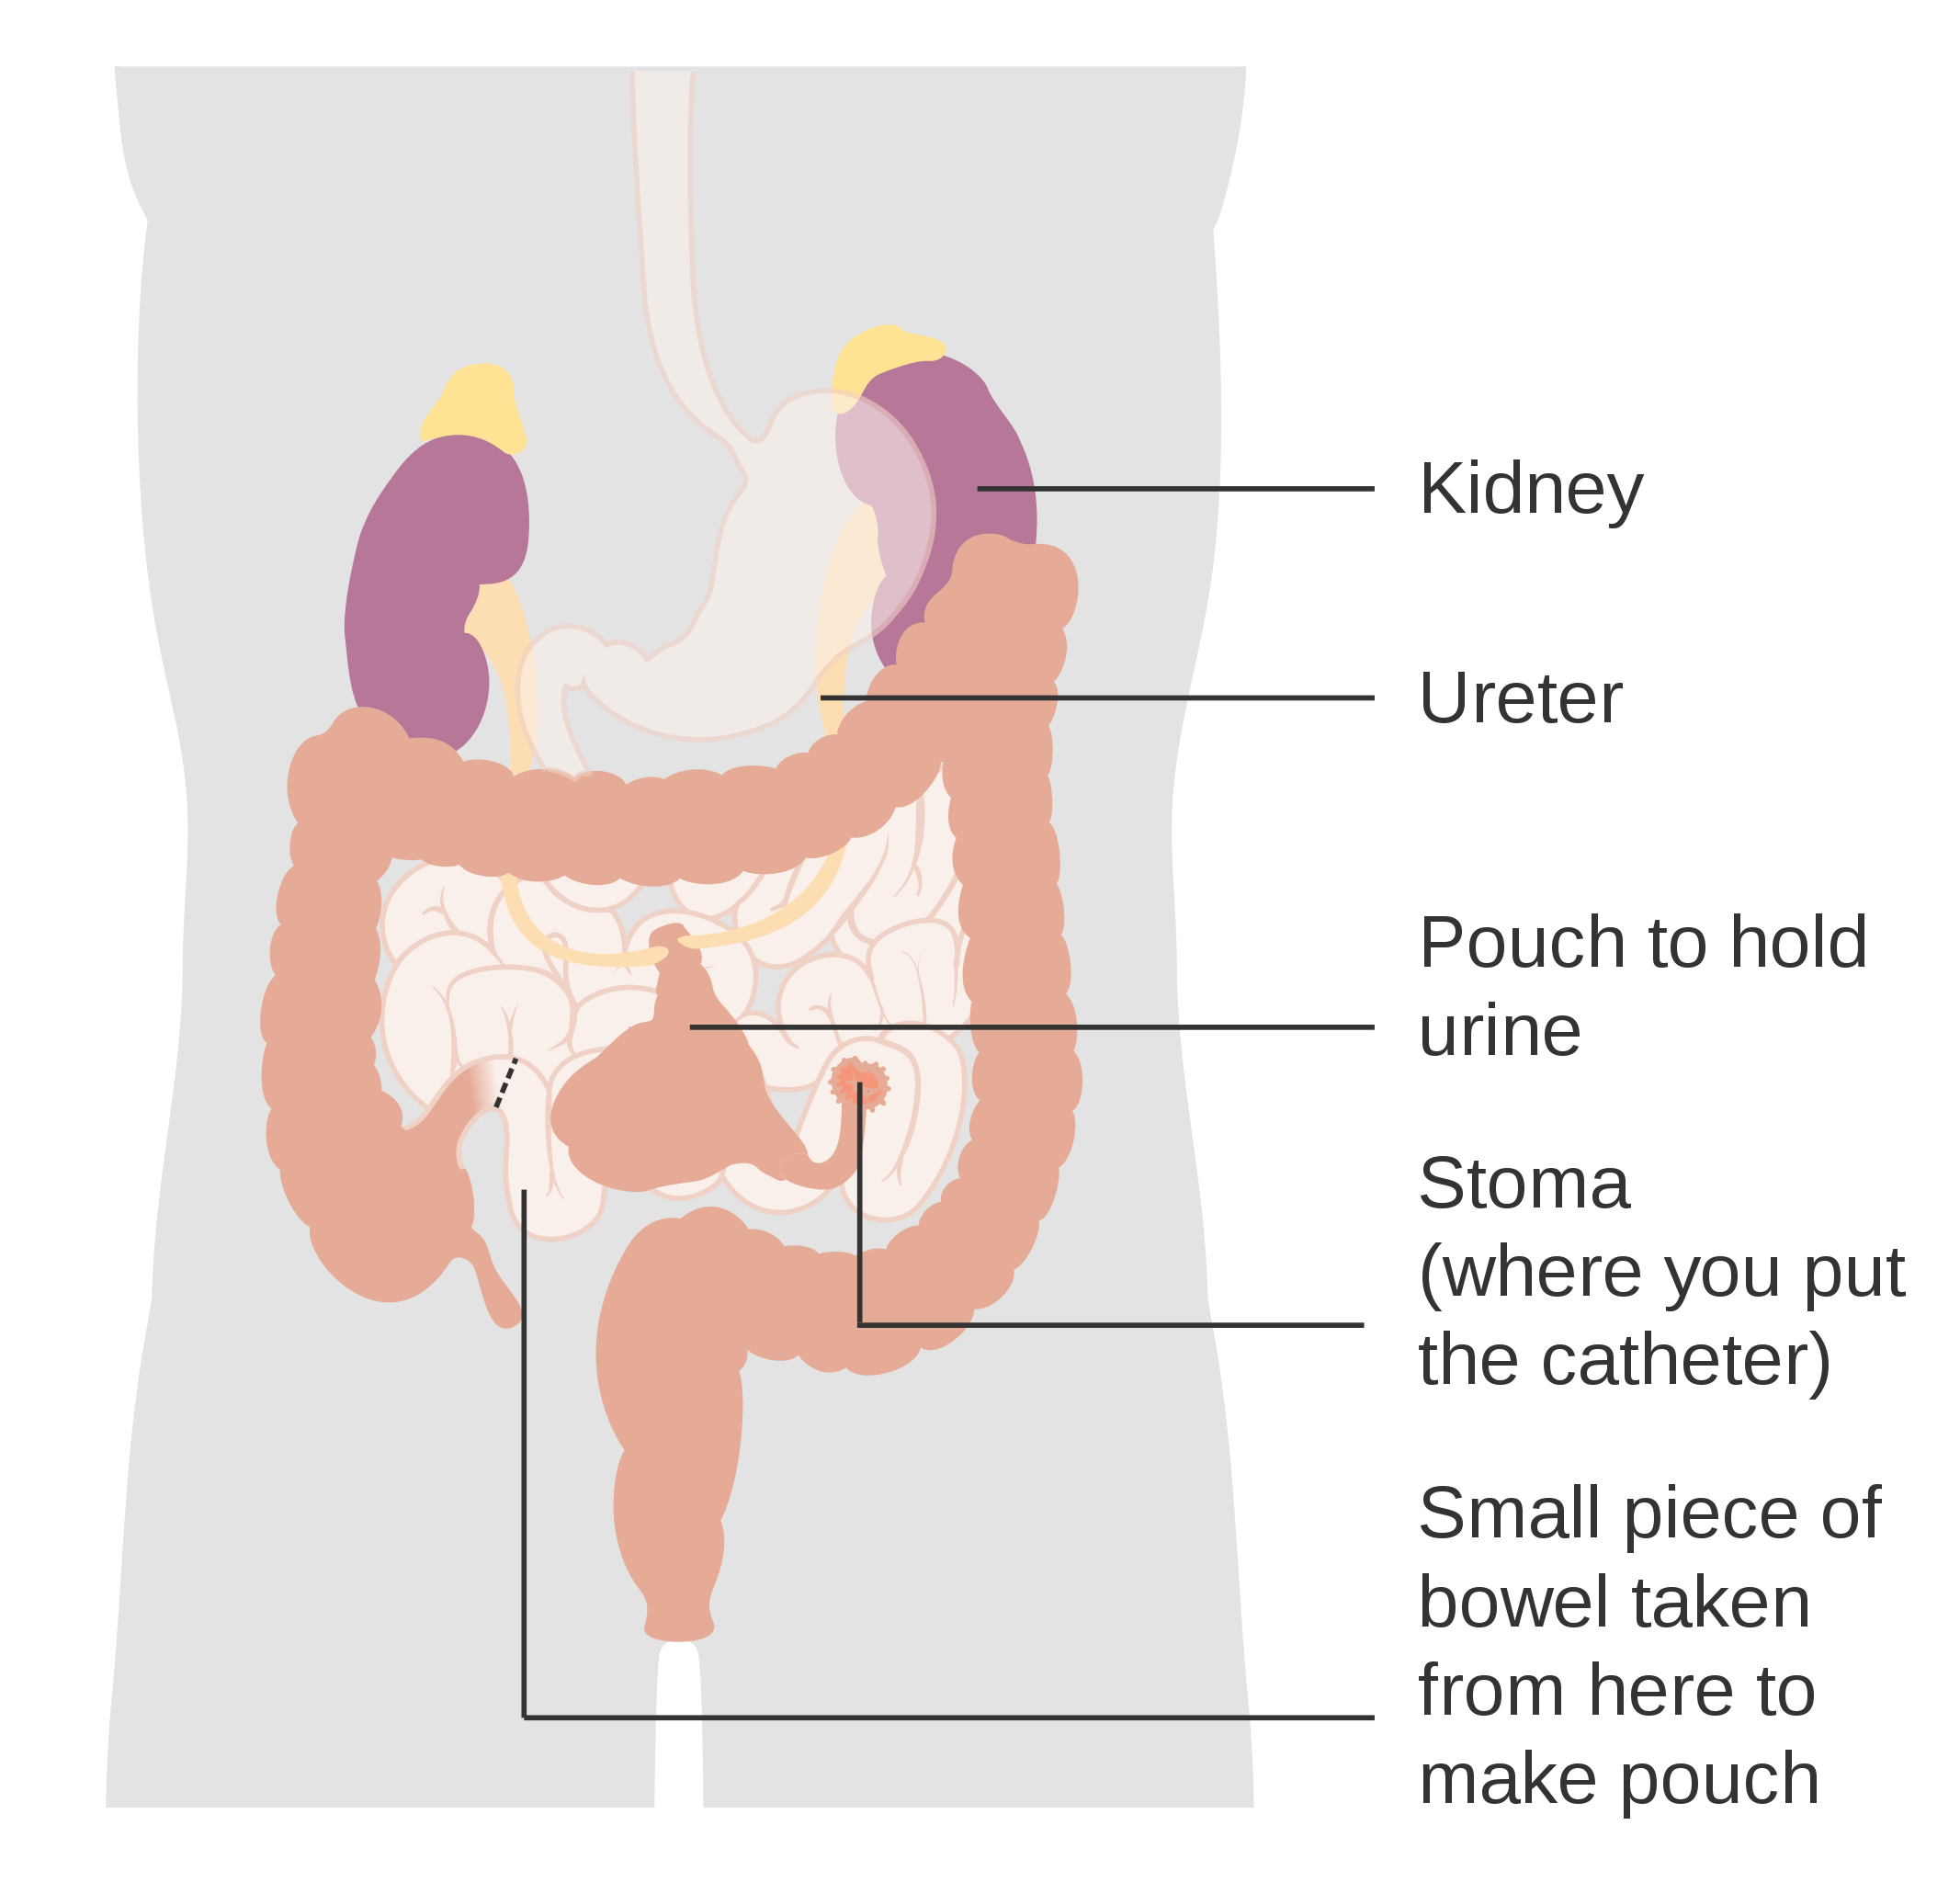 Diagram showing a continent urinary diversion CRUK